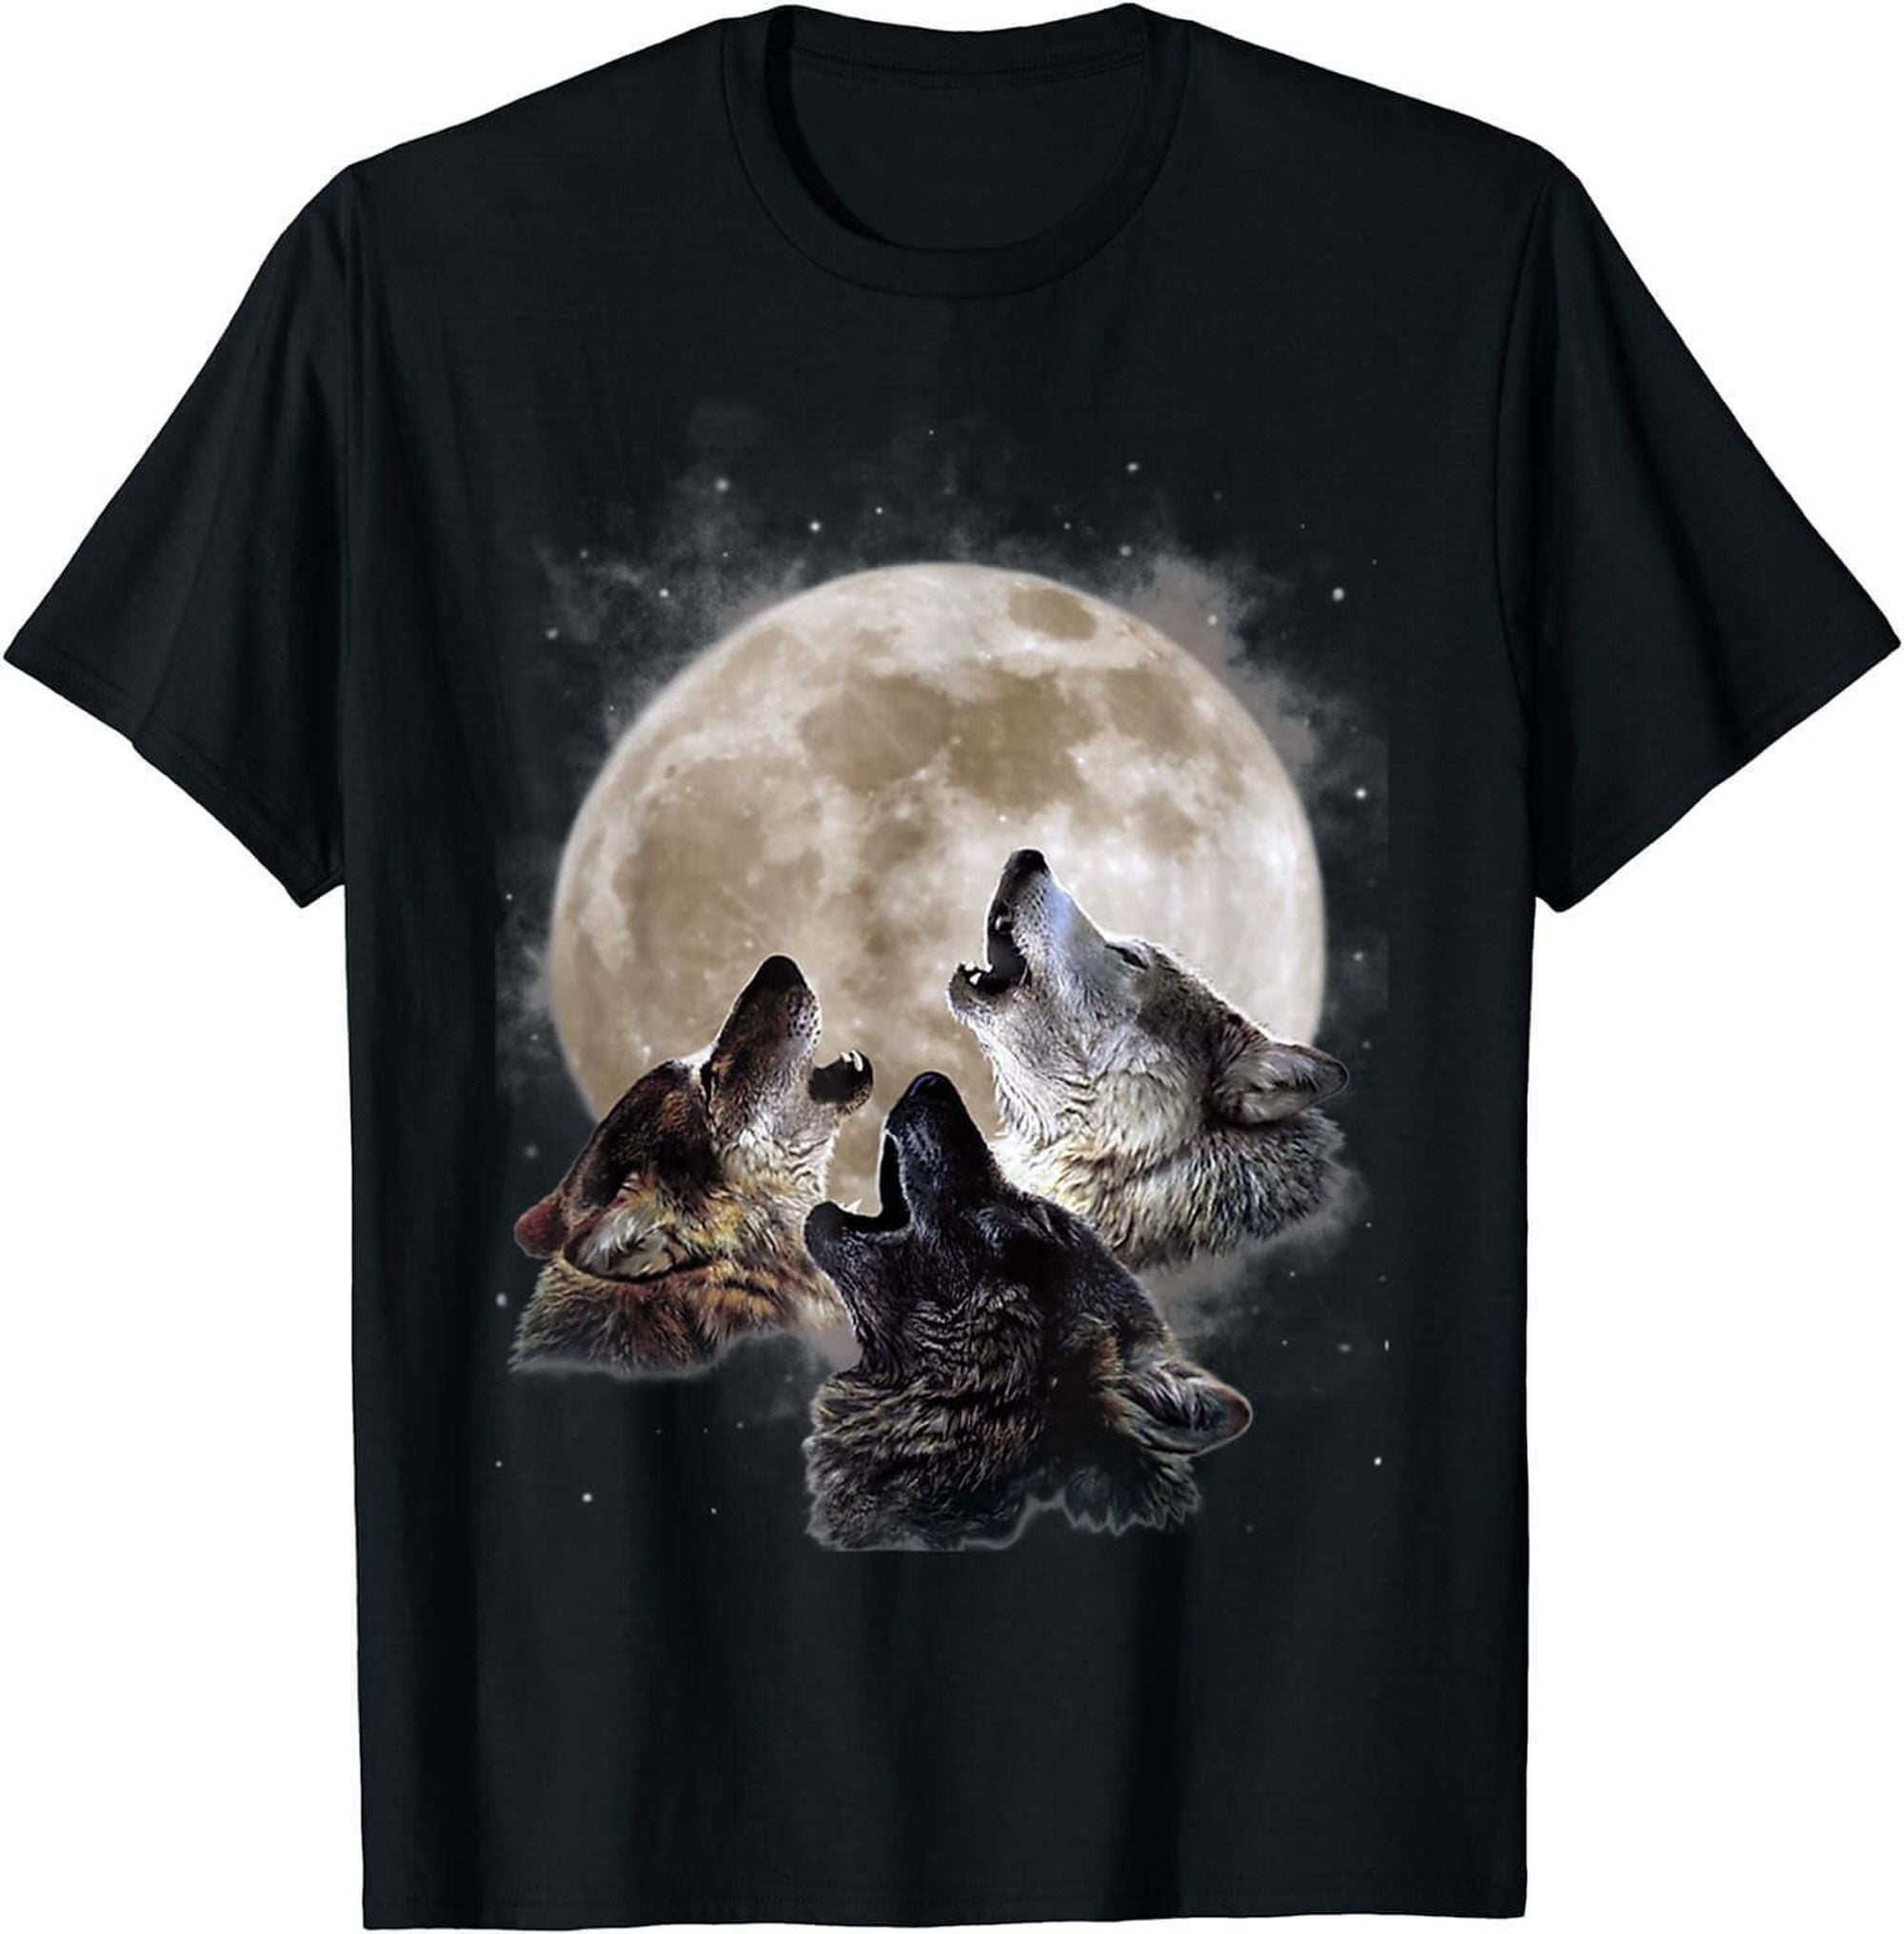 Nature Lovers' Delight: Majestic Wolf T-Shirt for Nocturnal Wildlife ...